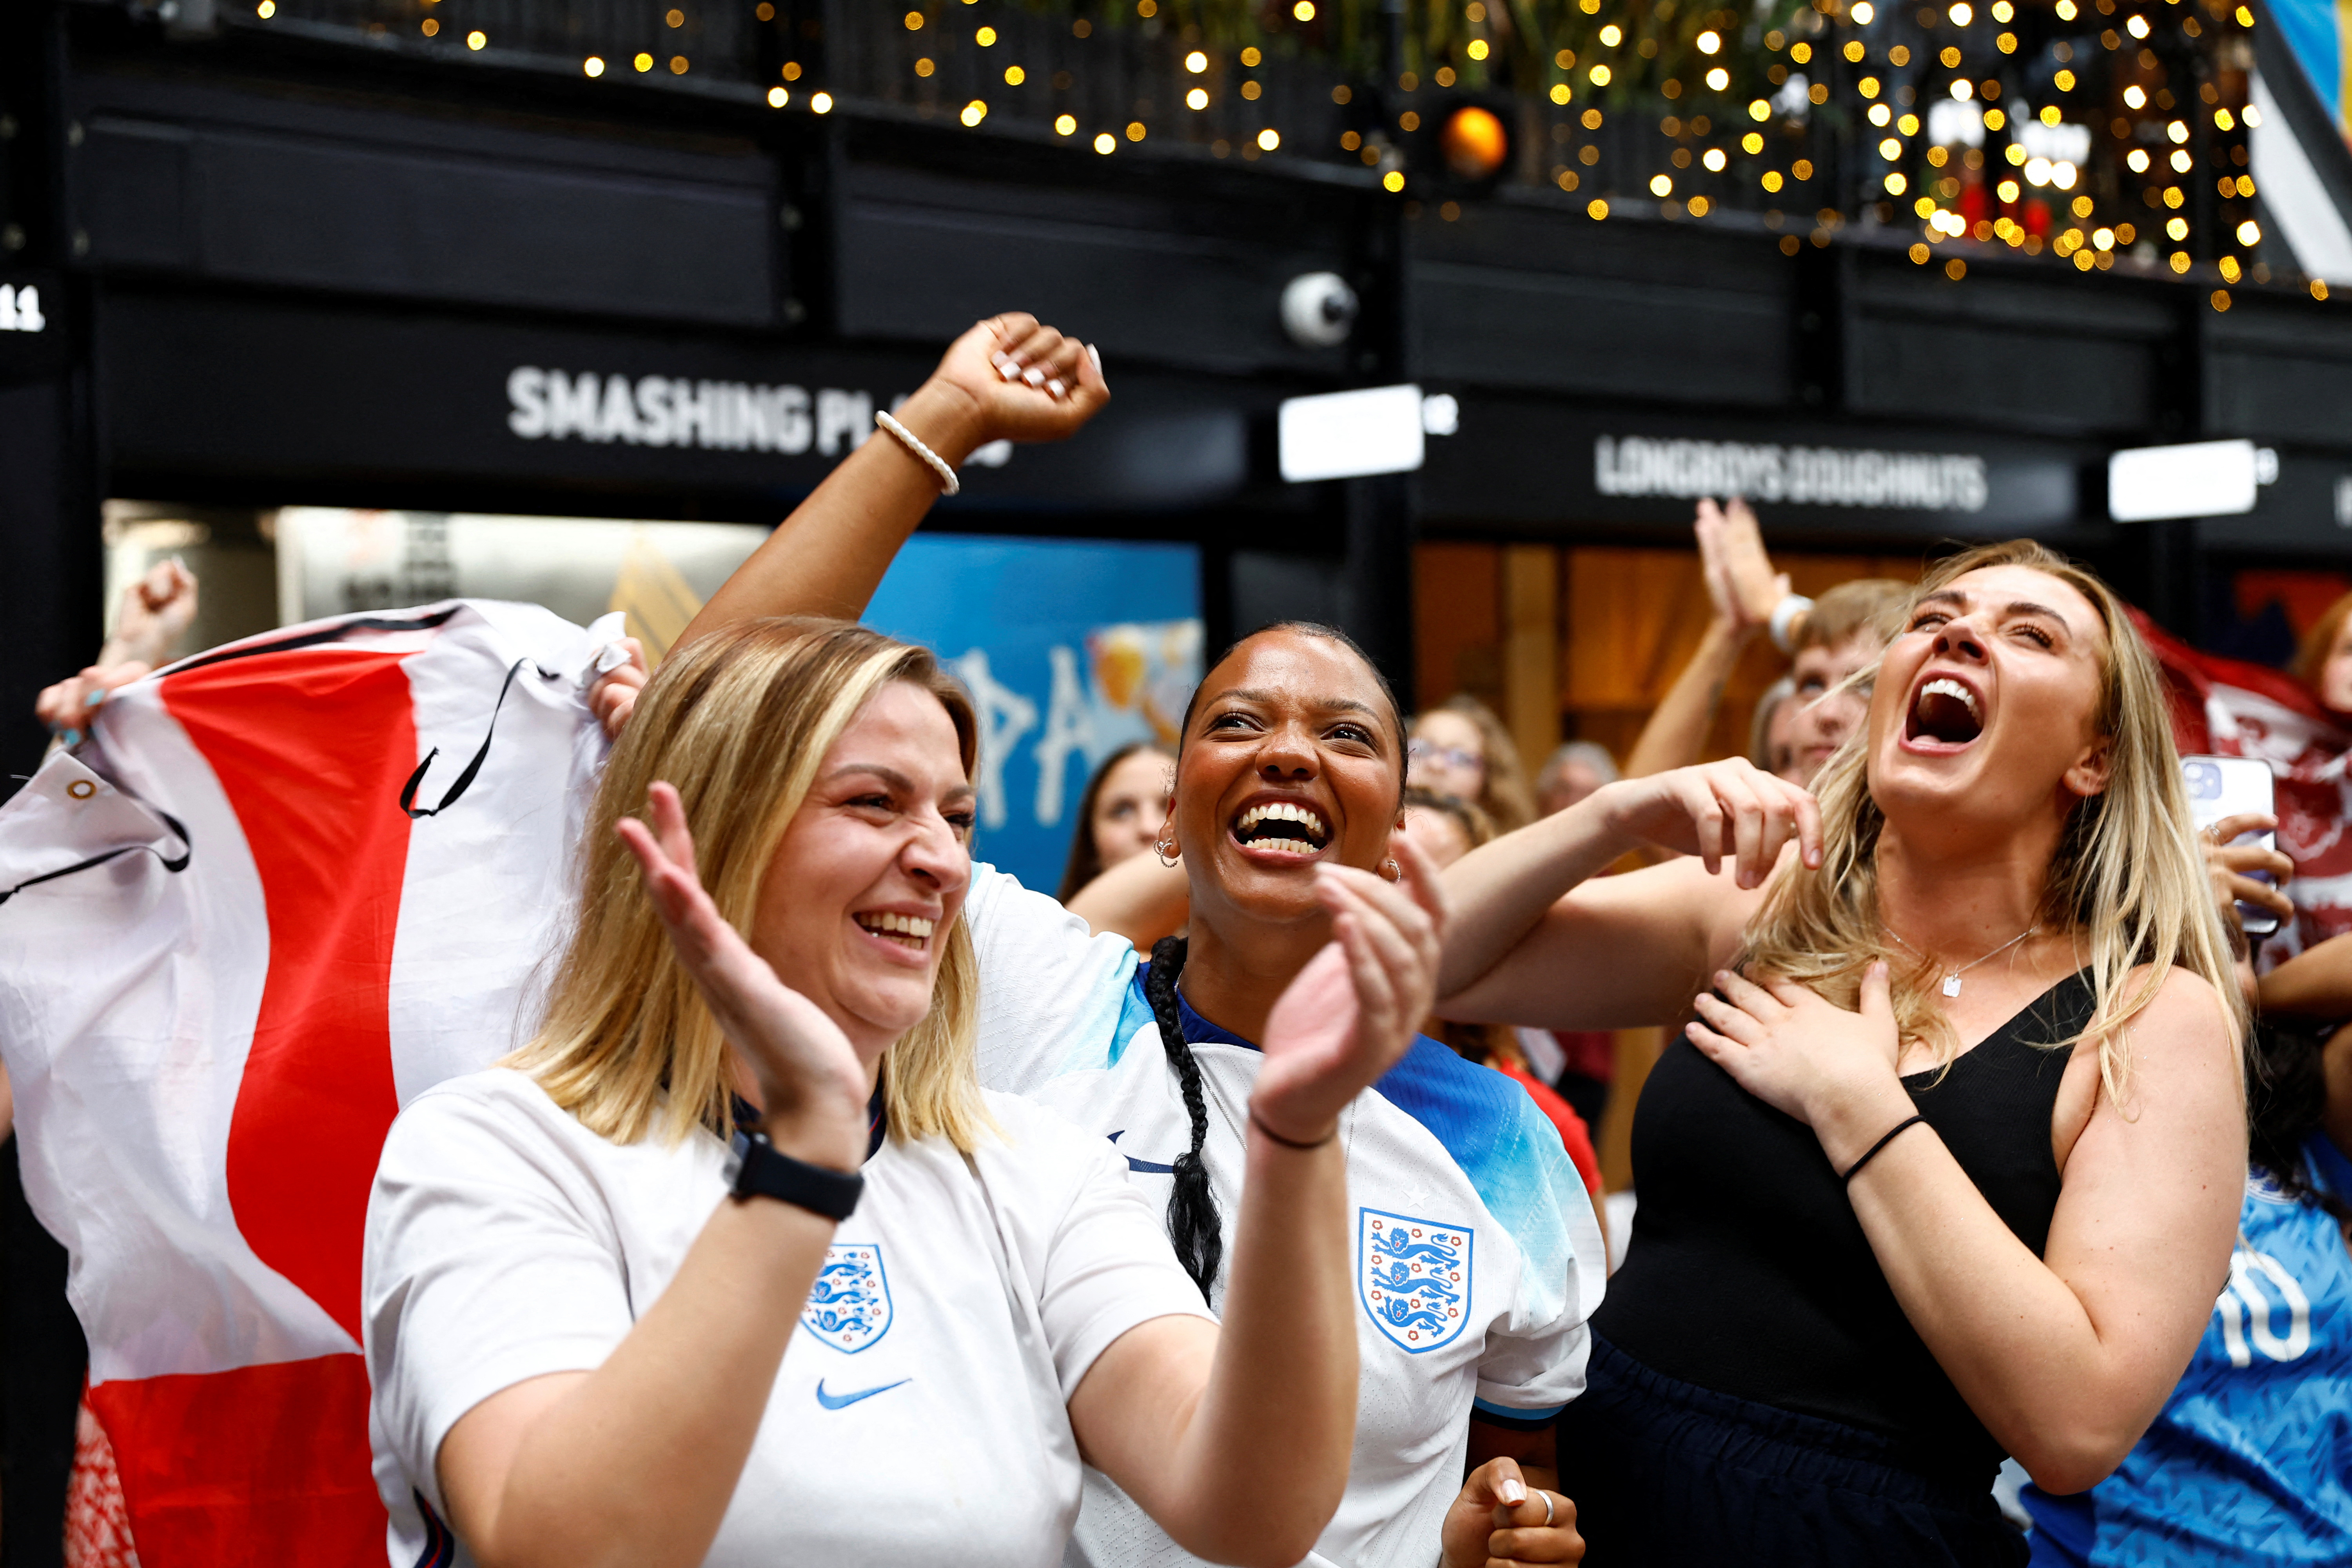 Nike v. Adidas: Soccer World Cup sponsors gear up for England, Spain finale